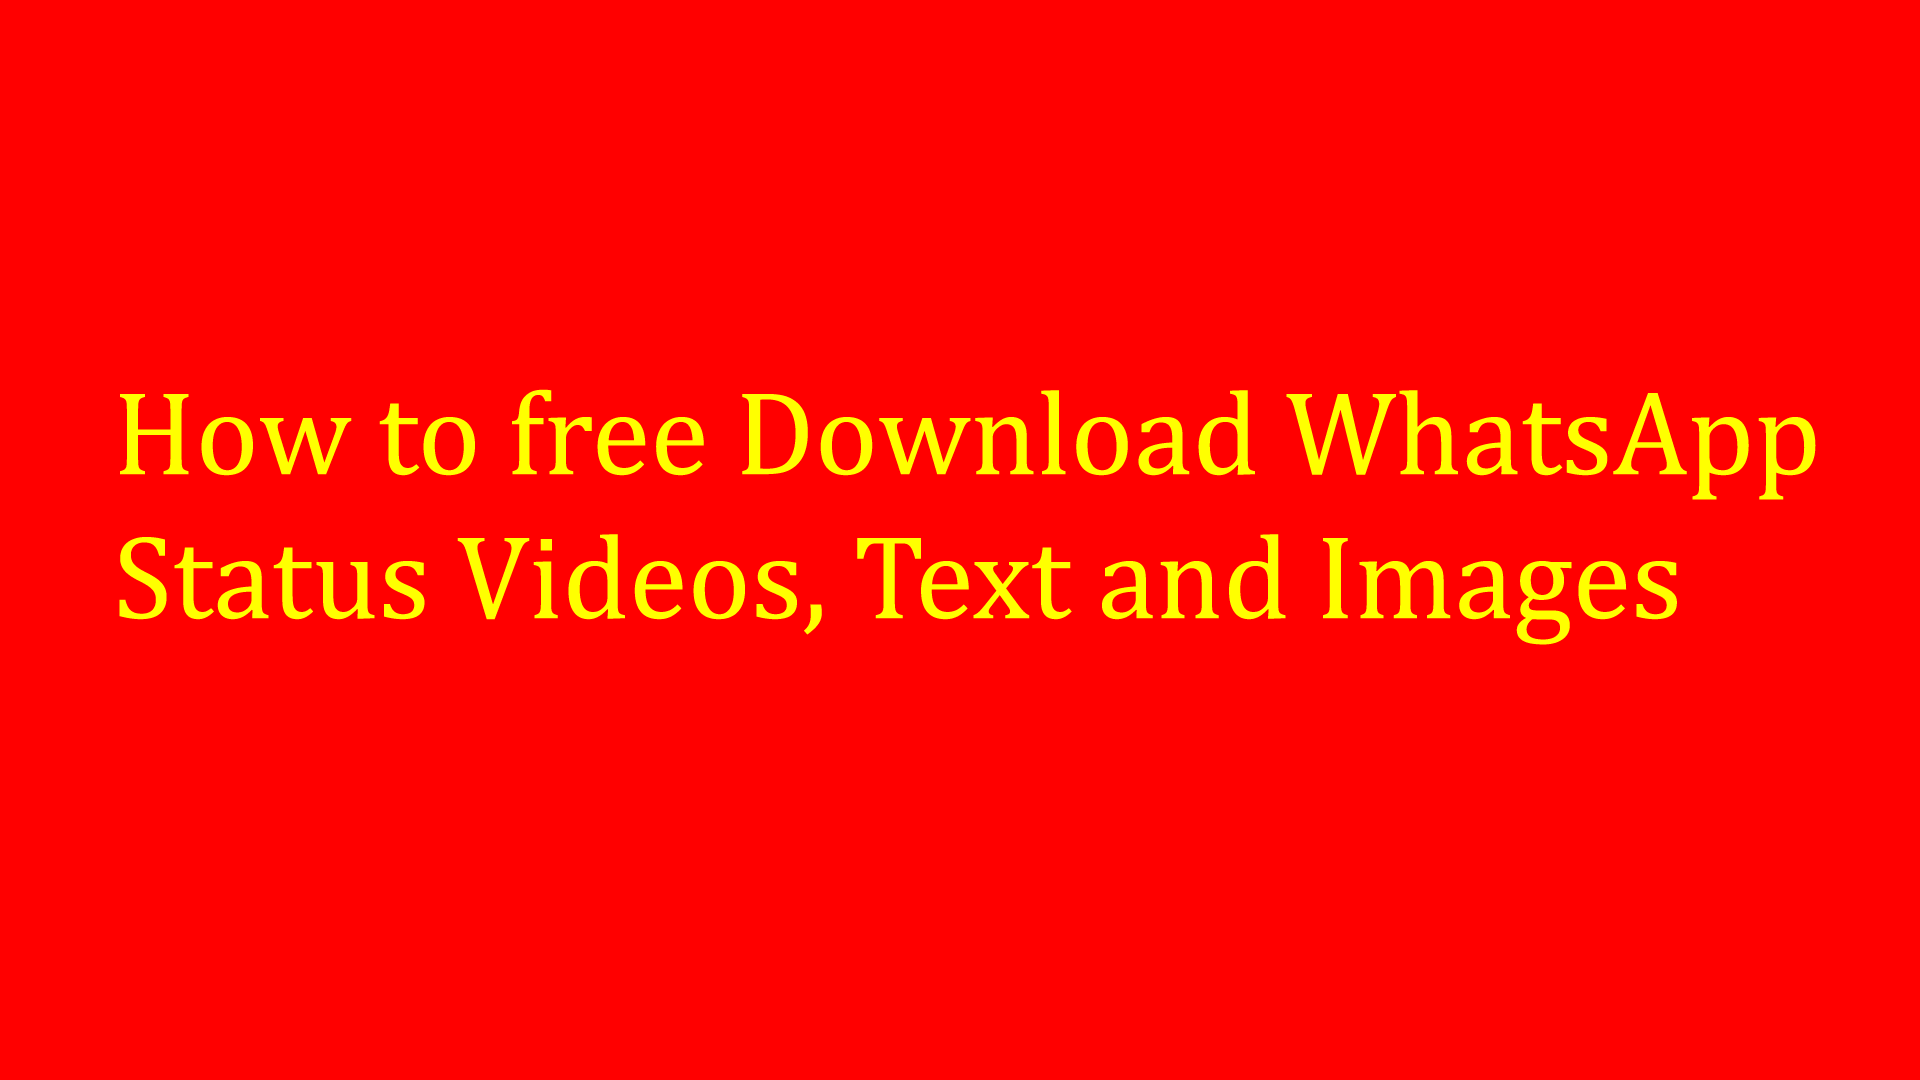 How to Download WhatsApp Status Videos, Text and Images